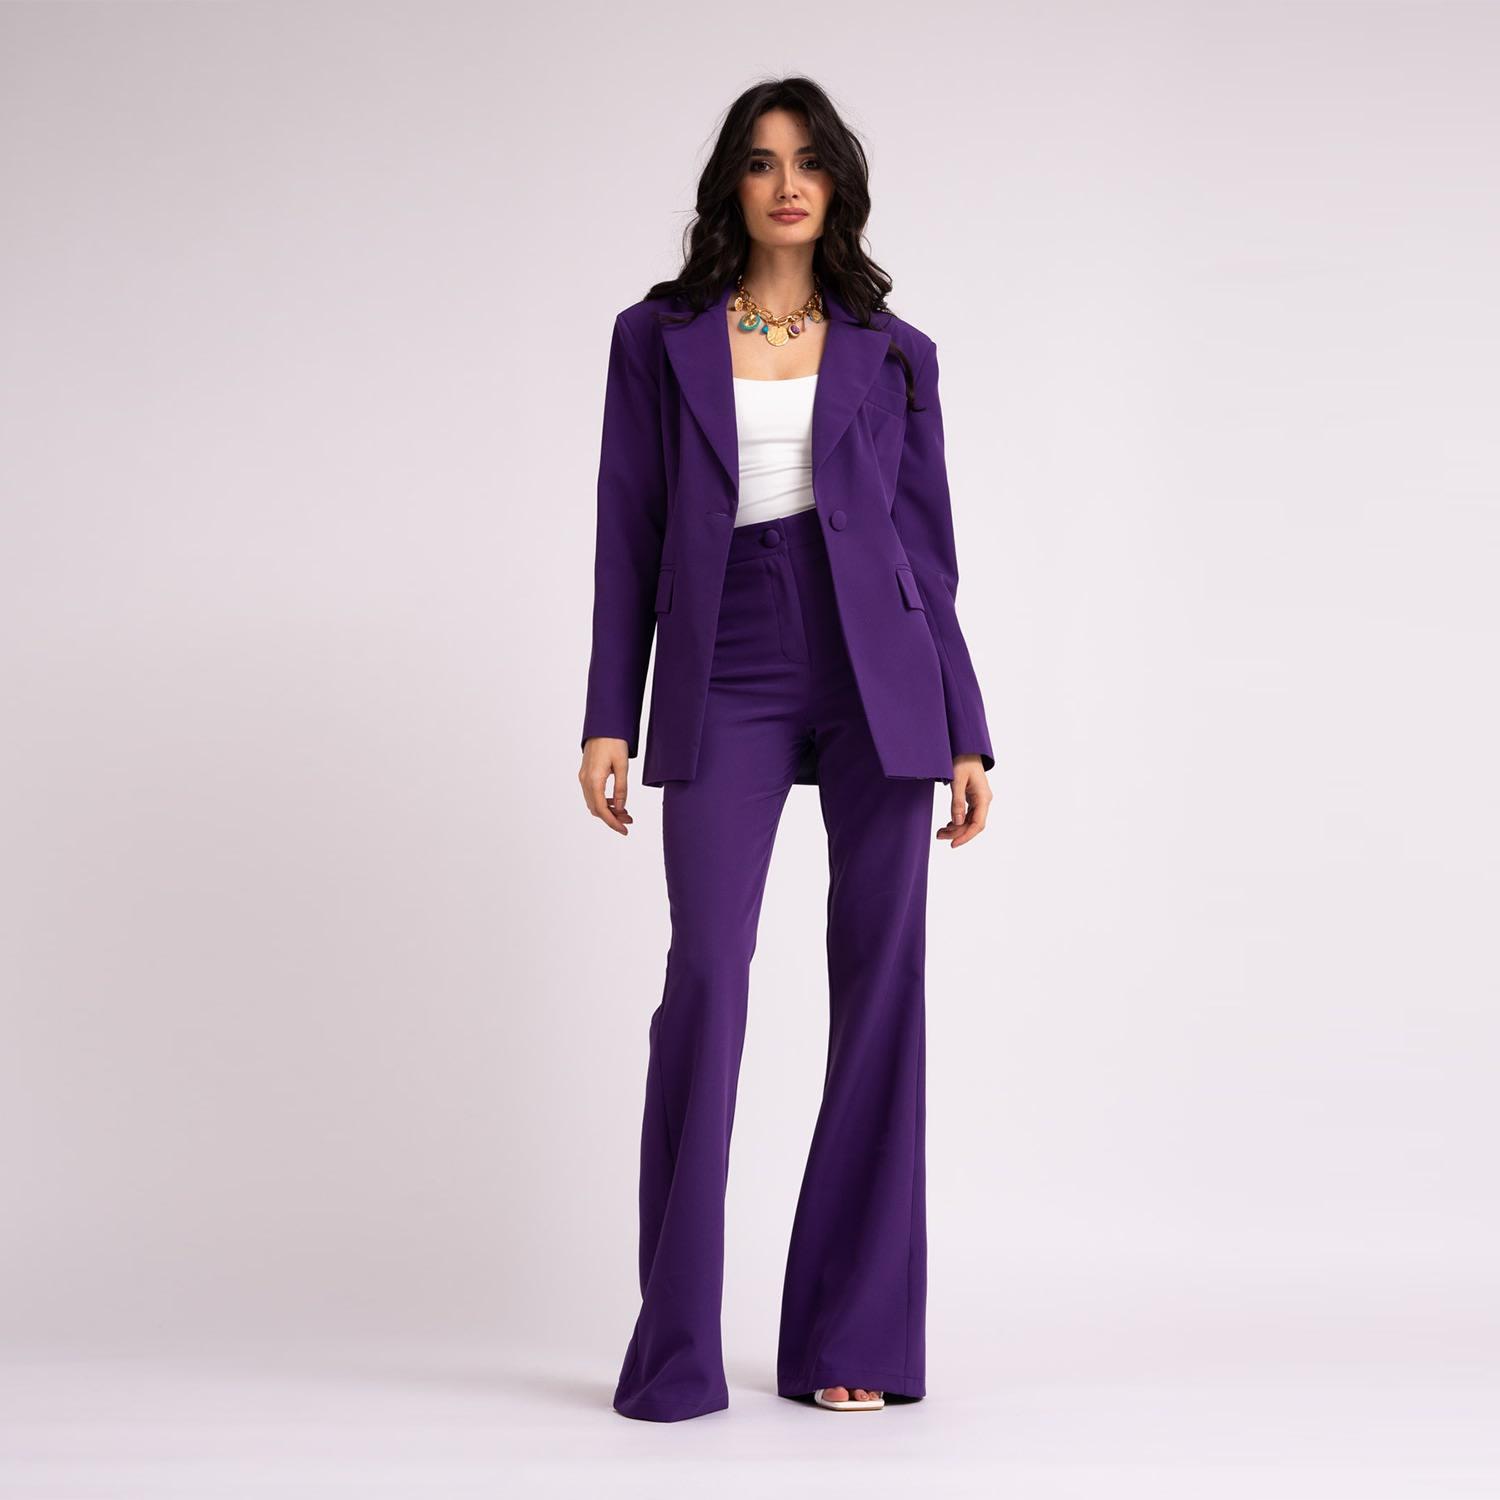 BLUZAT Deep Purple Suit With Slim Fit Blazer And Flared Trousers | Lyst